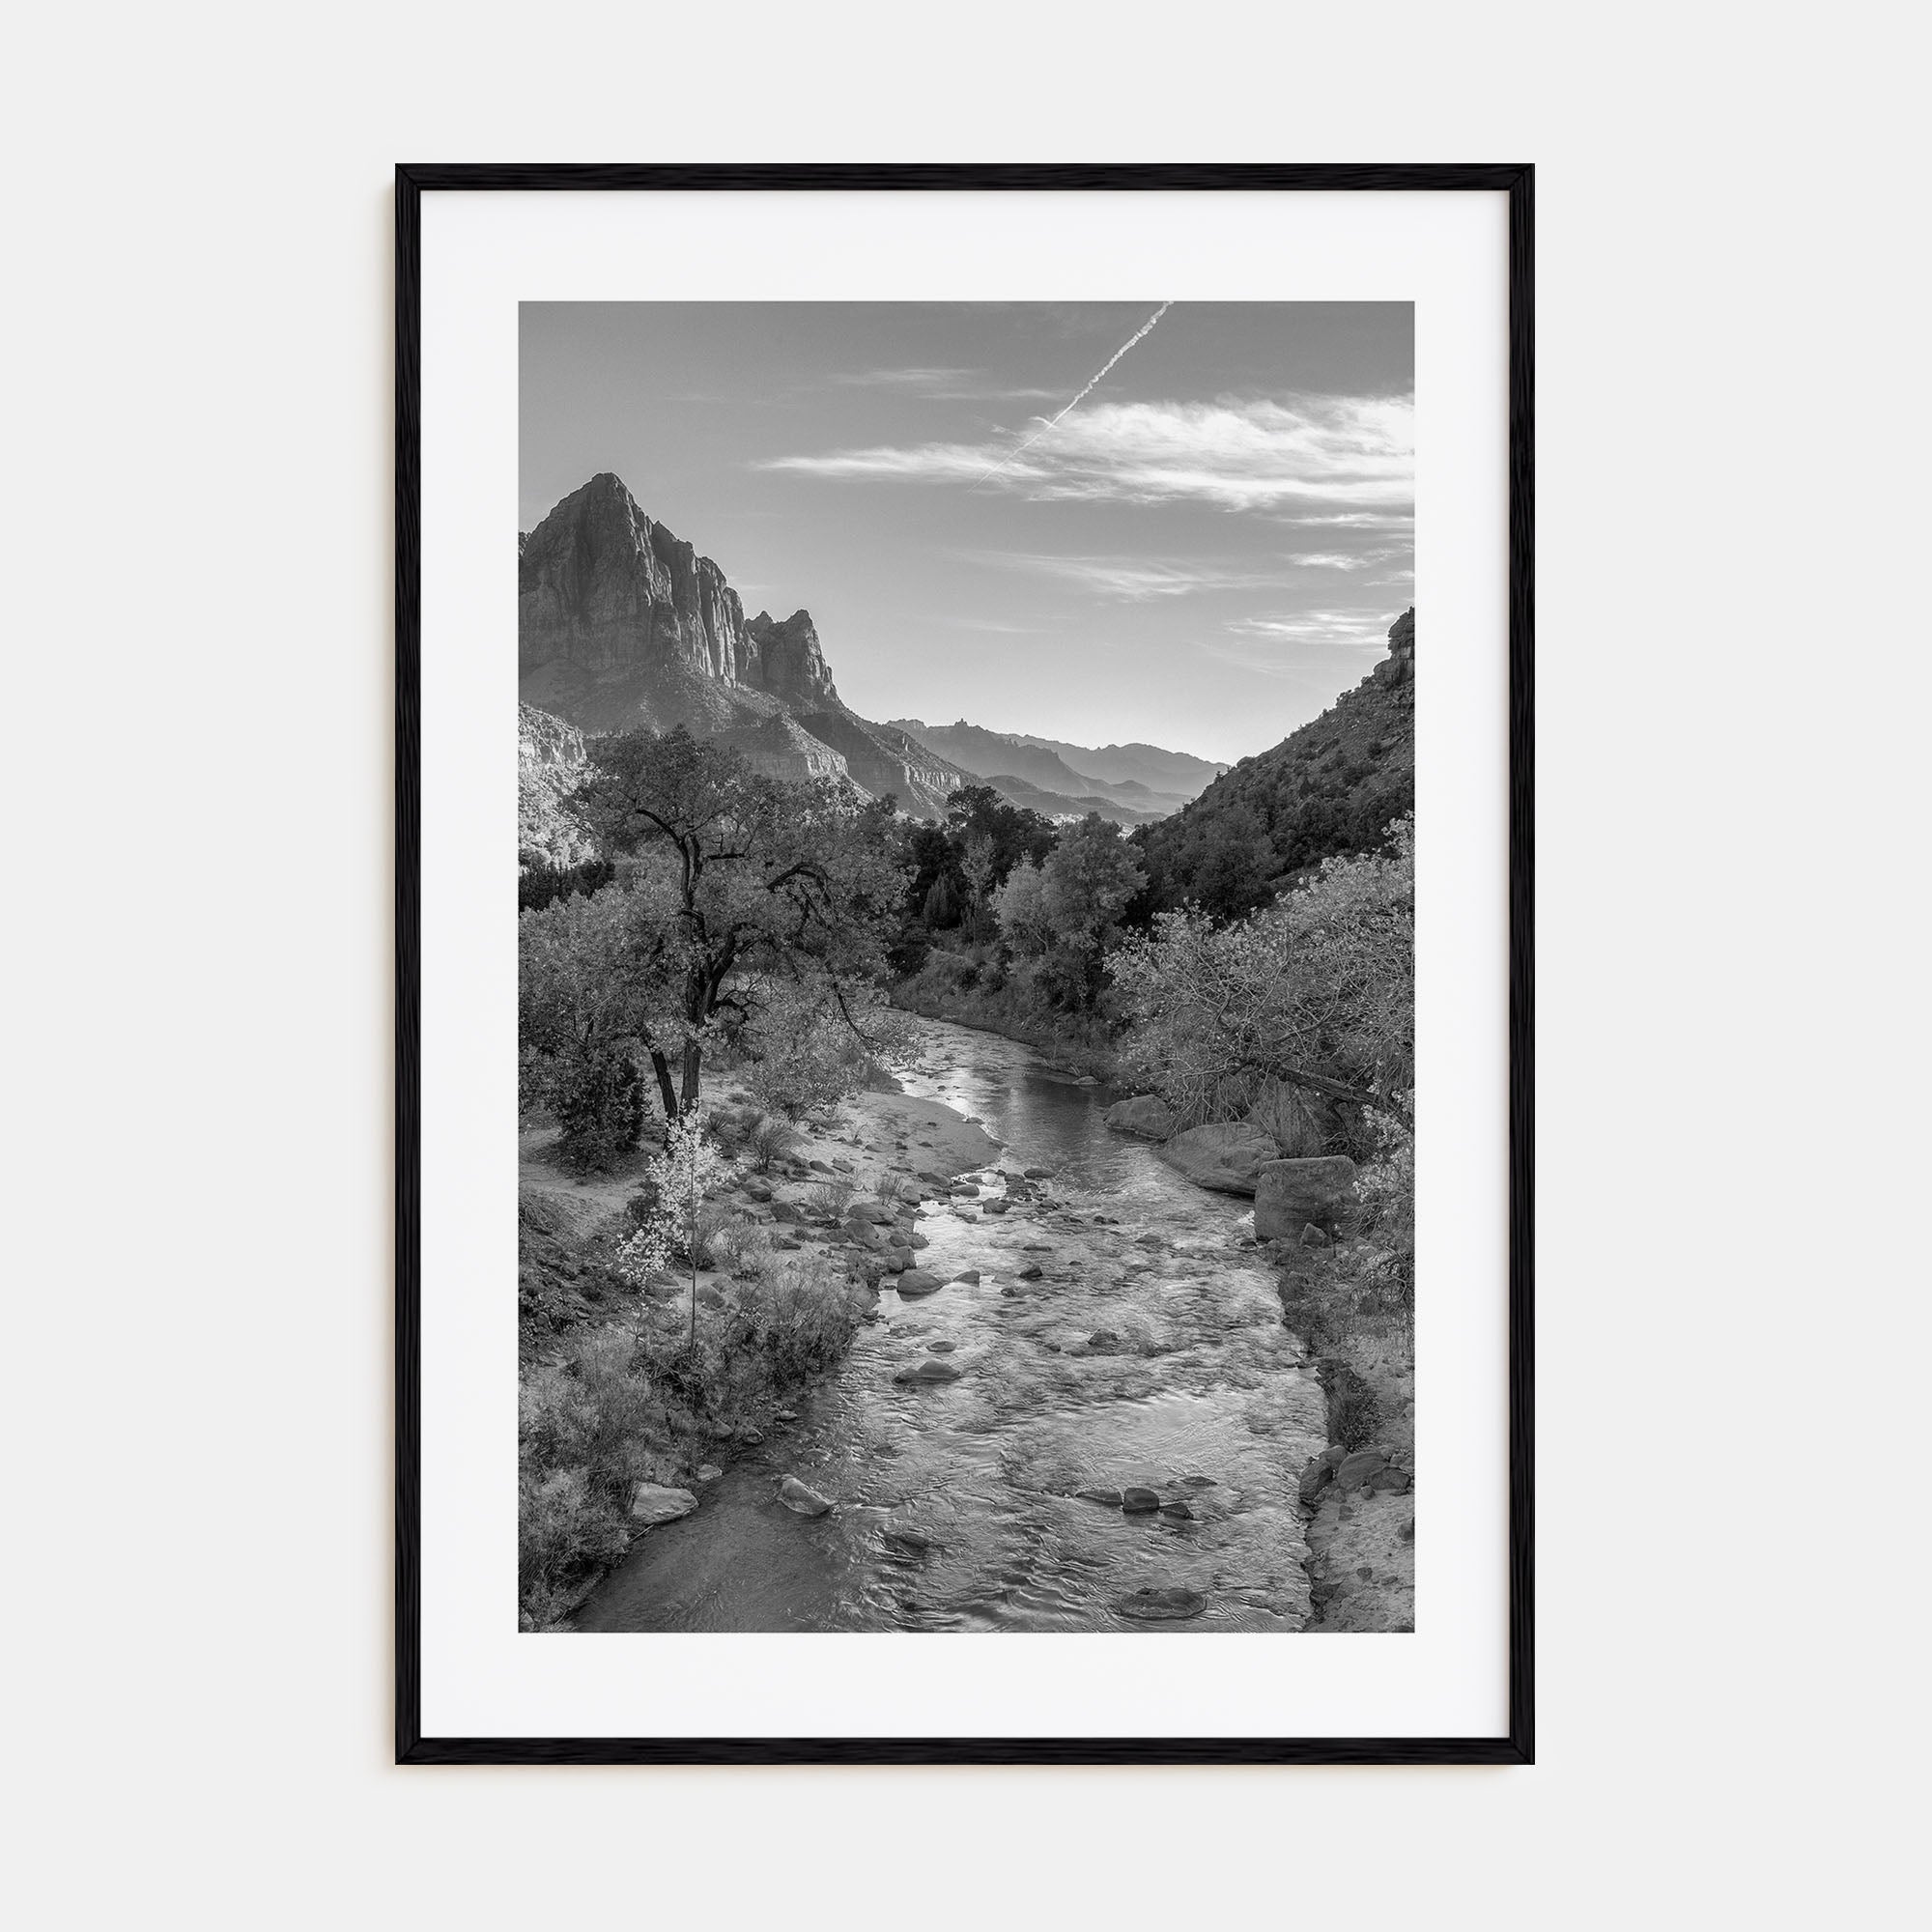 Zion National Park Photo B&W Poster